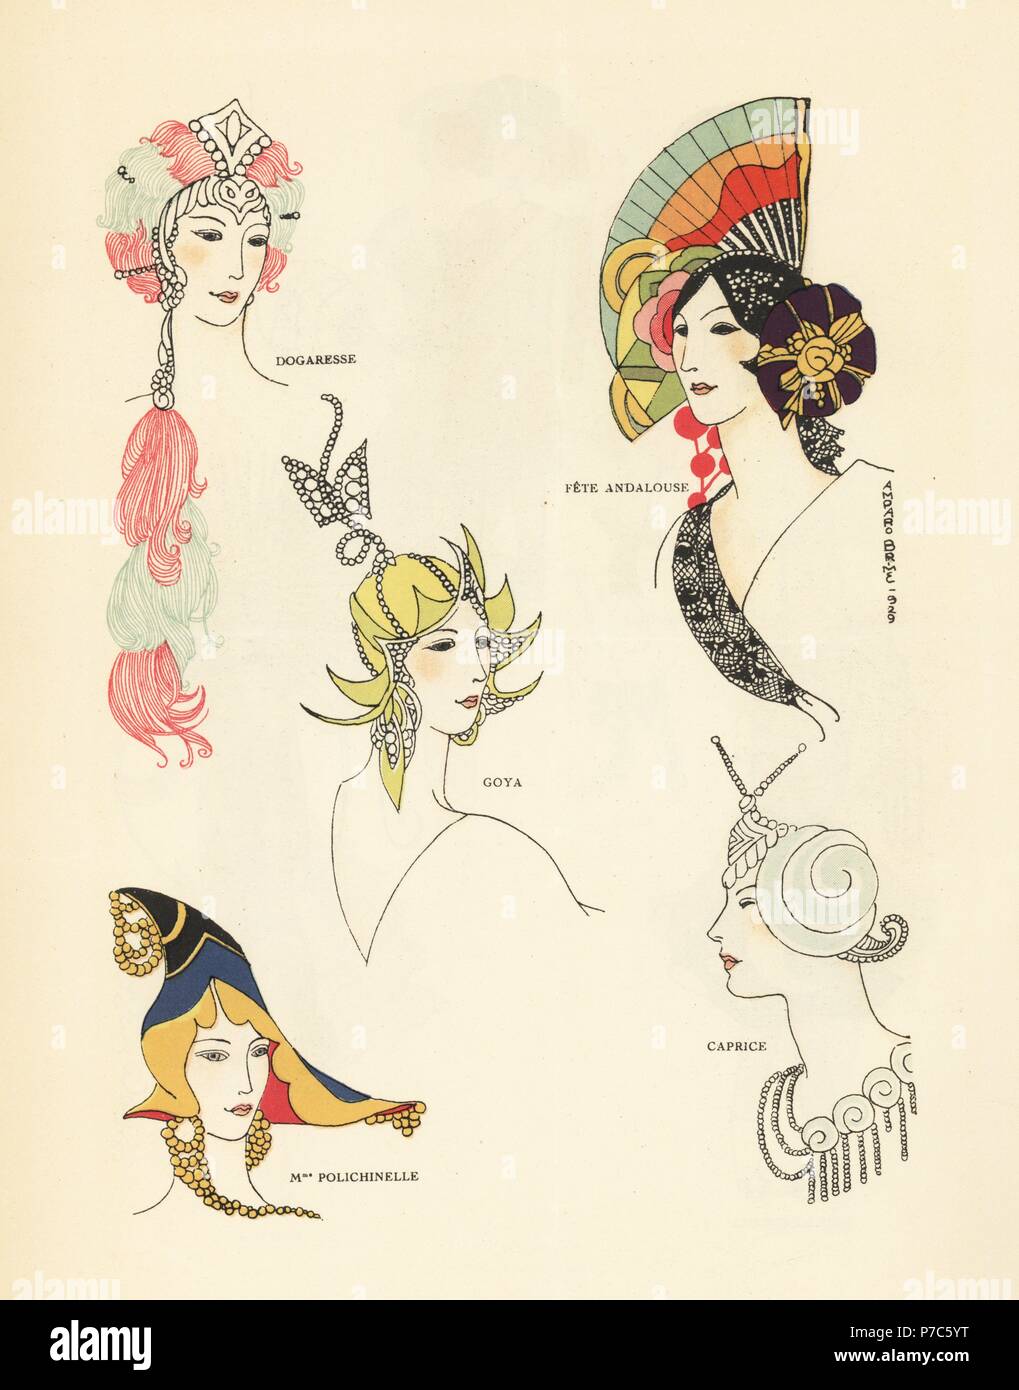 Women in fancy dress hats including a Duchess of Venice, an Andalusian festival, Goya, Mlle. Polichinelle, and a caprice. Illustration by Amparo Brime. Handcolored pochoir (stencil) lithograph from the French luxury fashion magazine Art, Gout, Beaute, 1929. Stock Photo